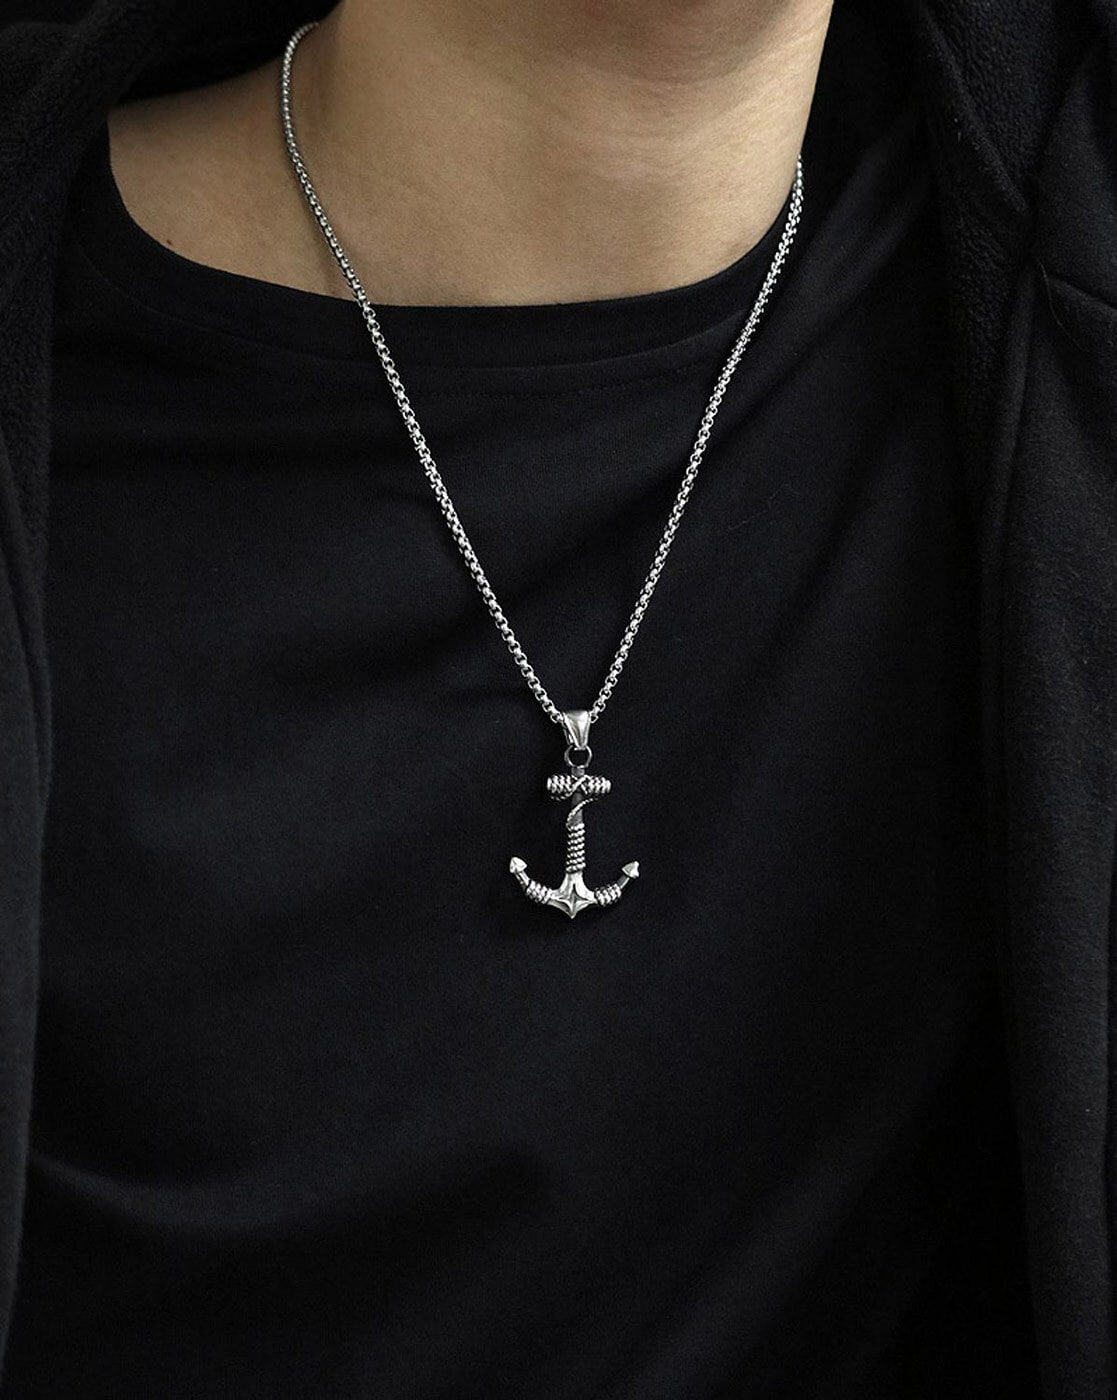 Buy M Men Style Anchor Ship Wheel Nautical Gold Zinc Metal Ship Pendant  Necklace Chain For Men And Women at Amazon.in